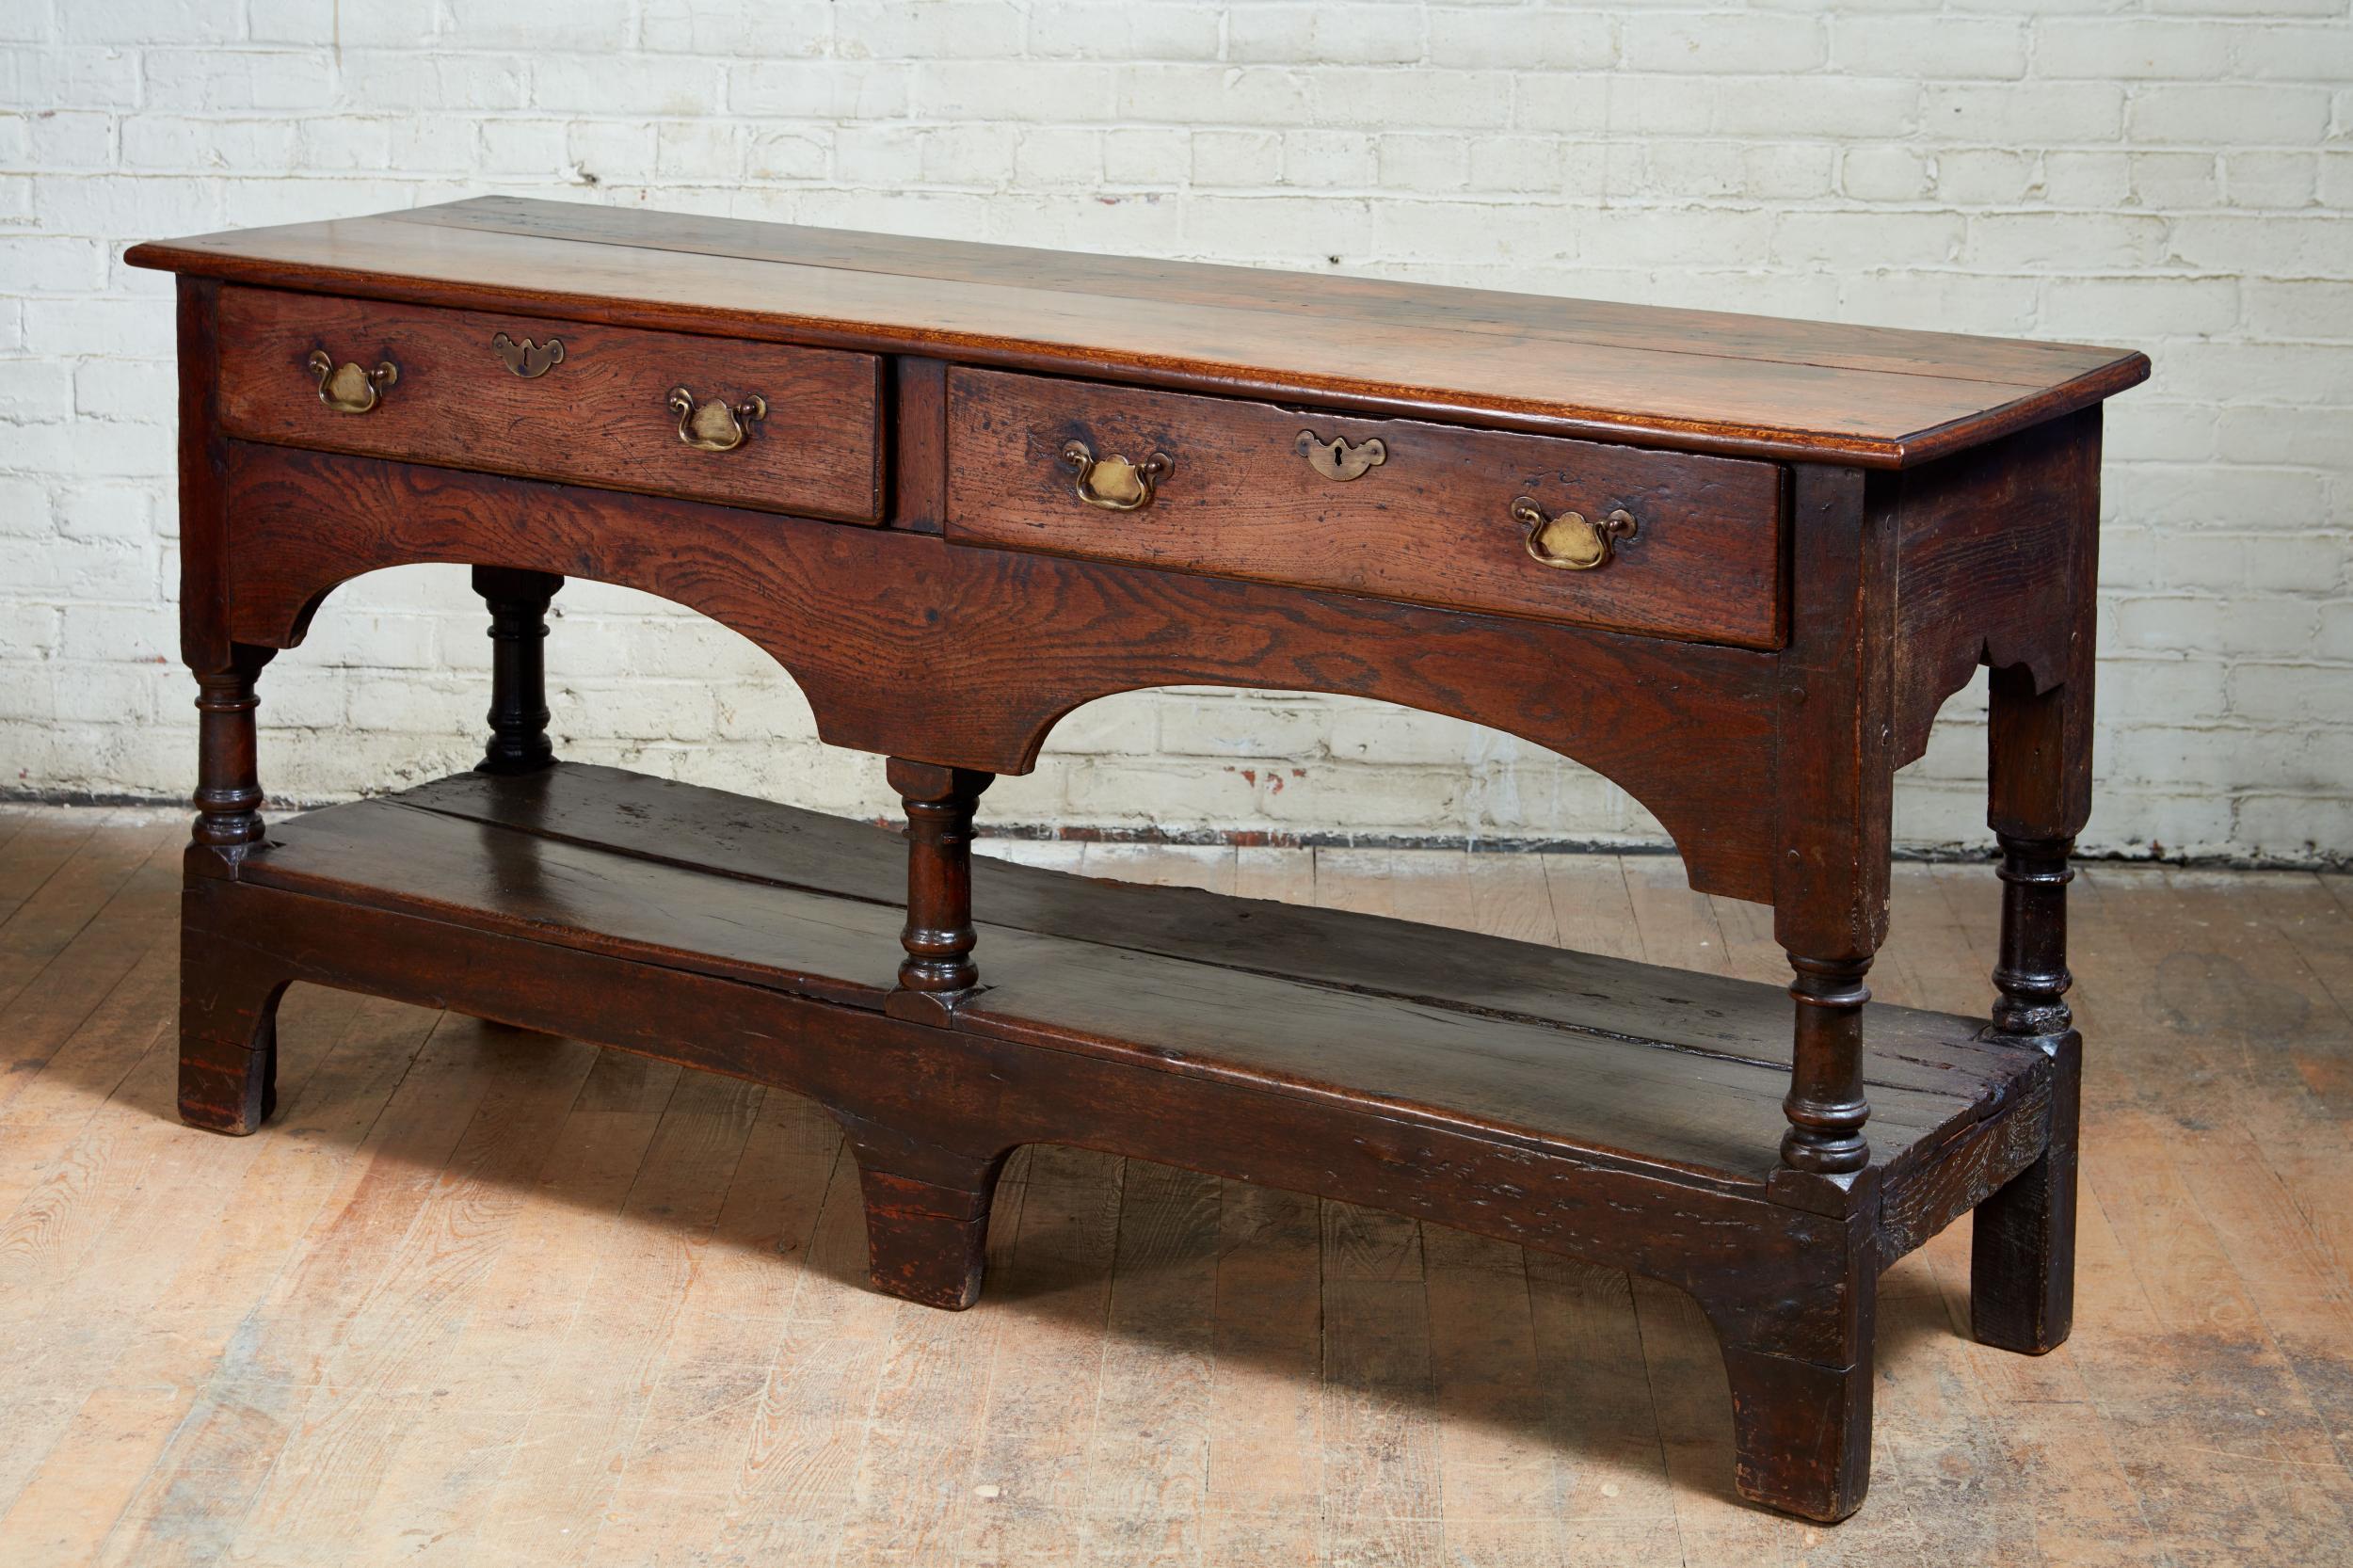 Fine Welsh 18th century low dresser of sculptural form, the two plank top with thumb molded edge over two drawers with double arched apron below and standing on balustrade turned legs having pot board and standing on bracket feet, the whole